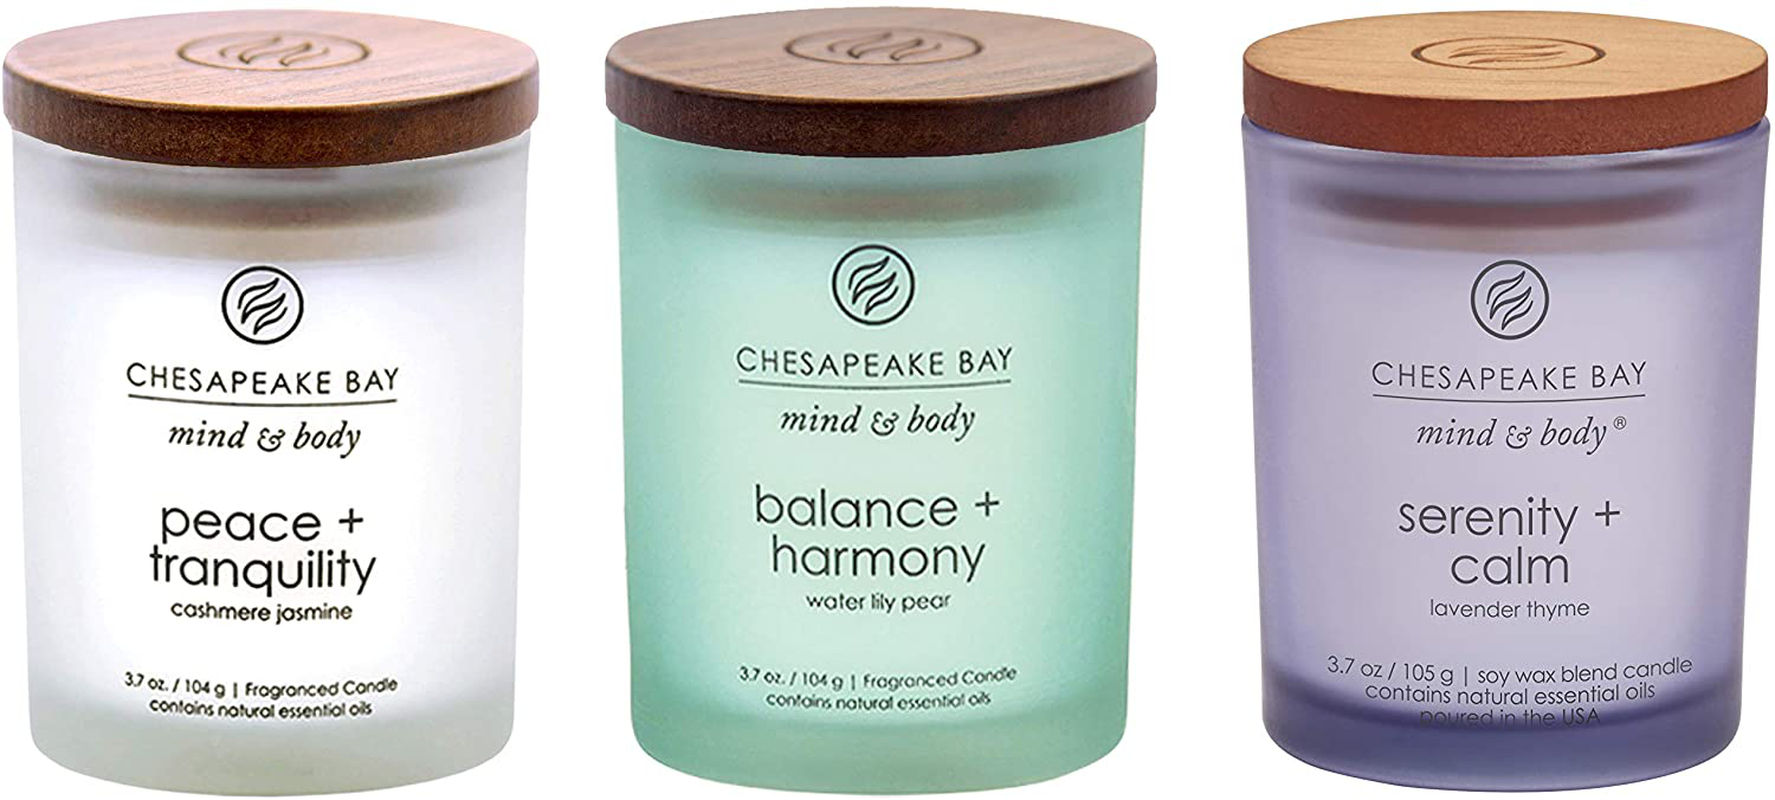 Chesapeake Bay Candle PT31921 Scented Candle, Balance + Harmony (Water Lily Pear), Large